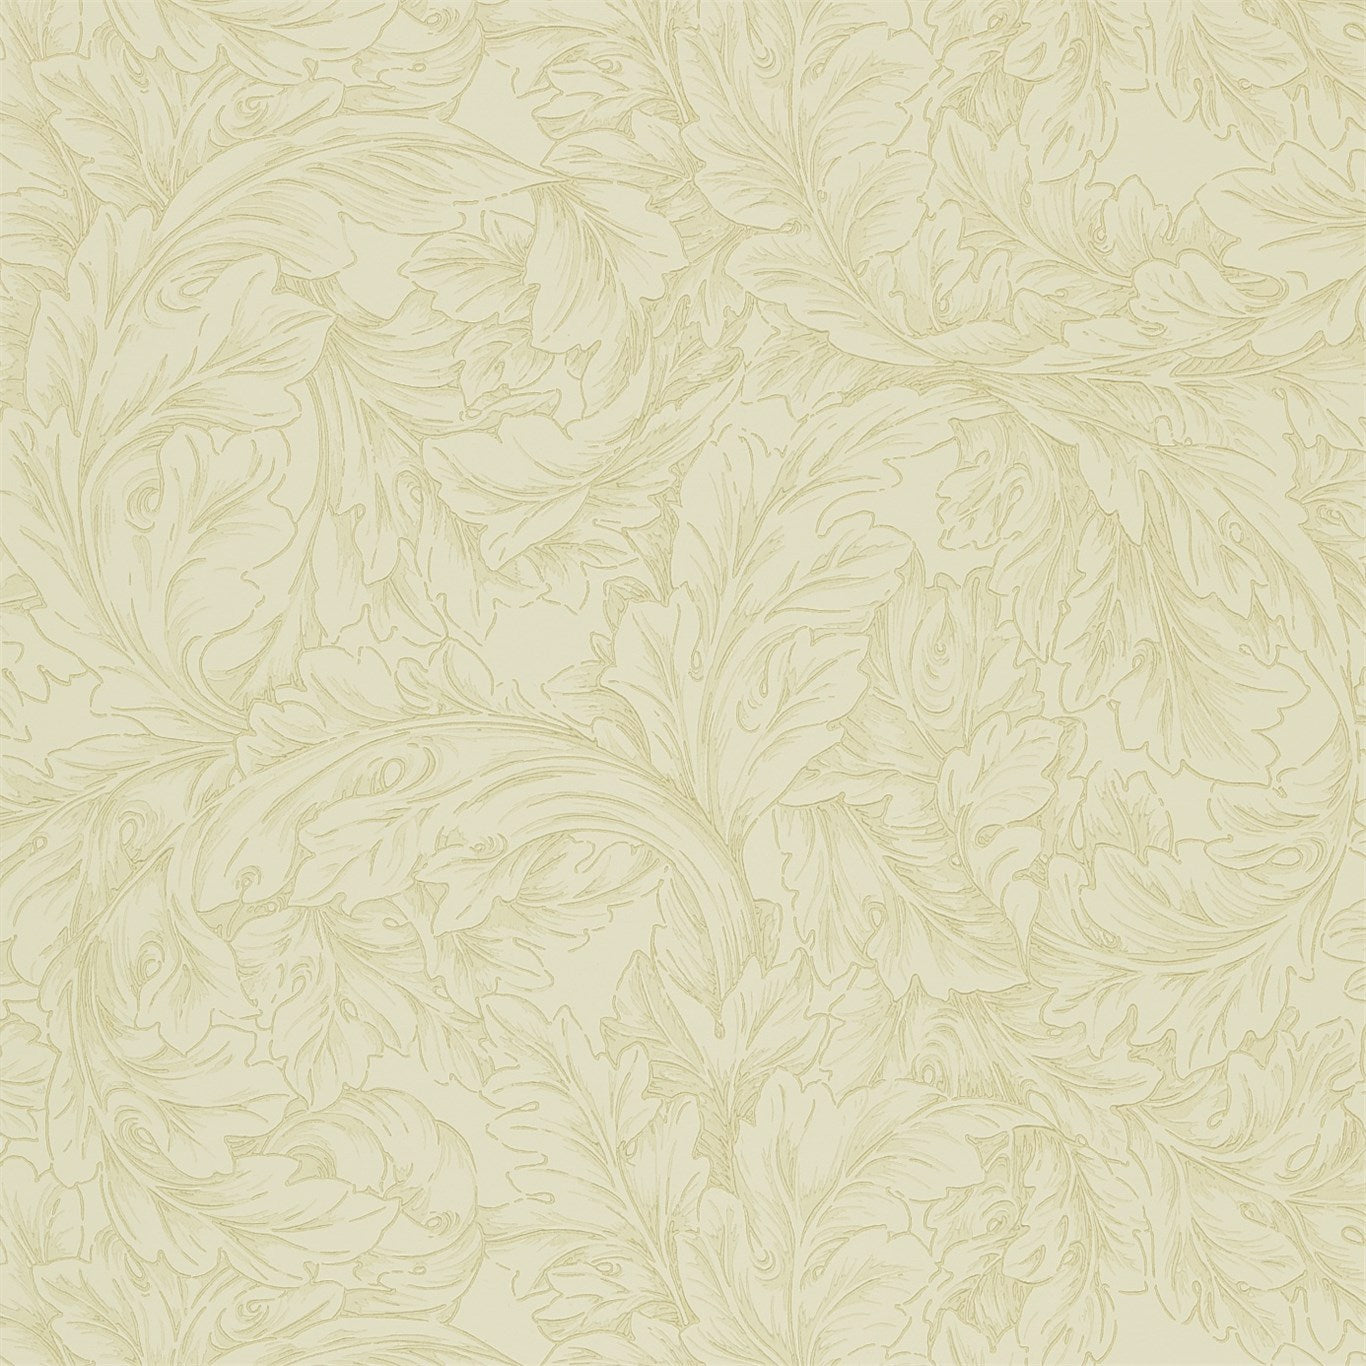 Acanthus Scroll Wallpaper by Morris & Co